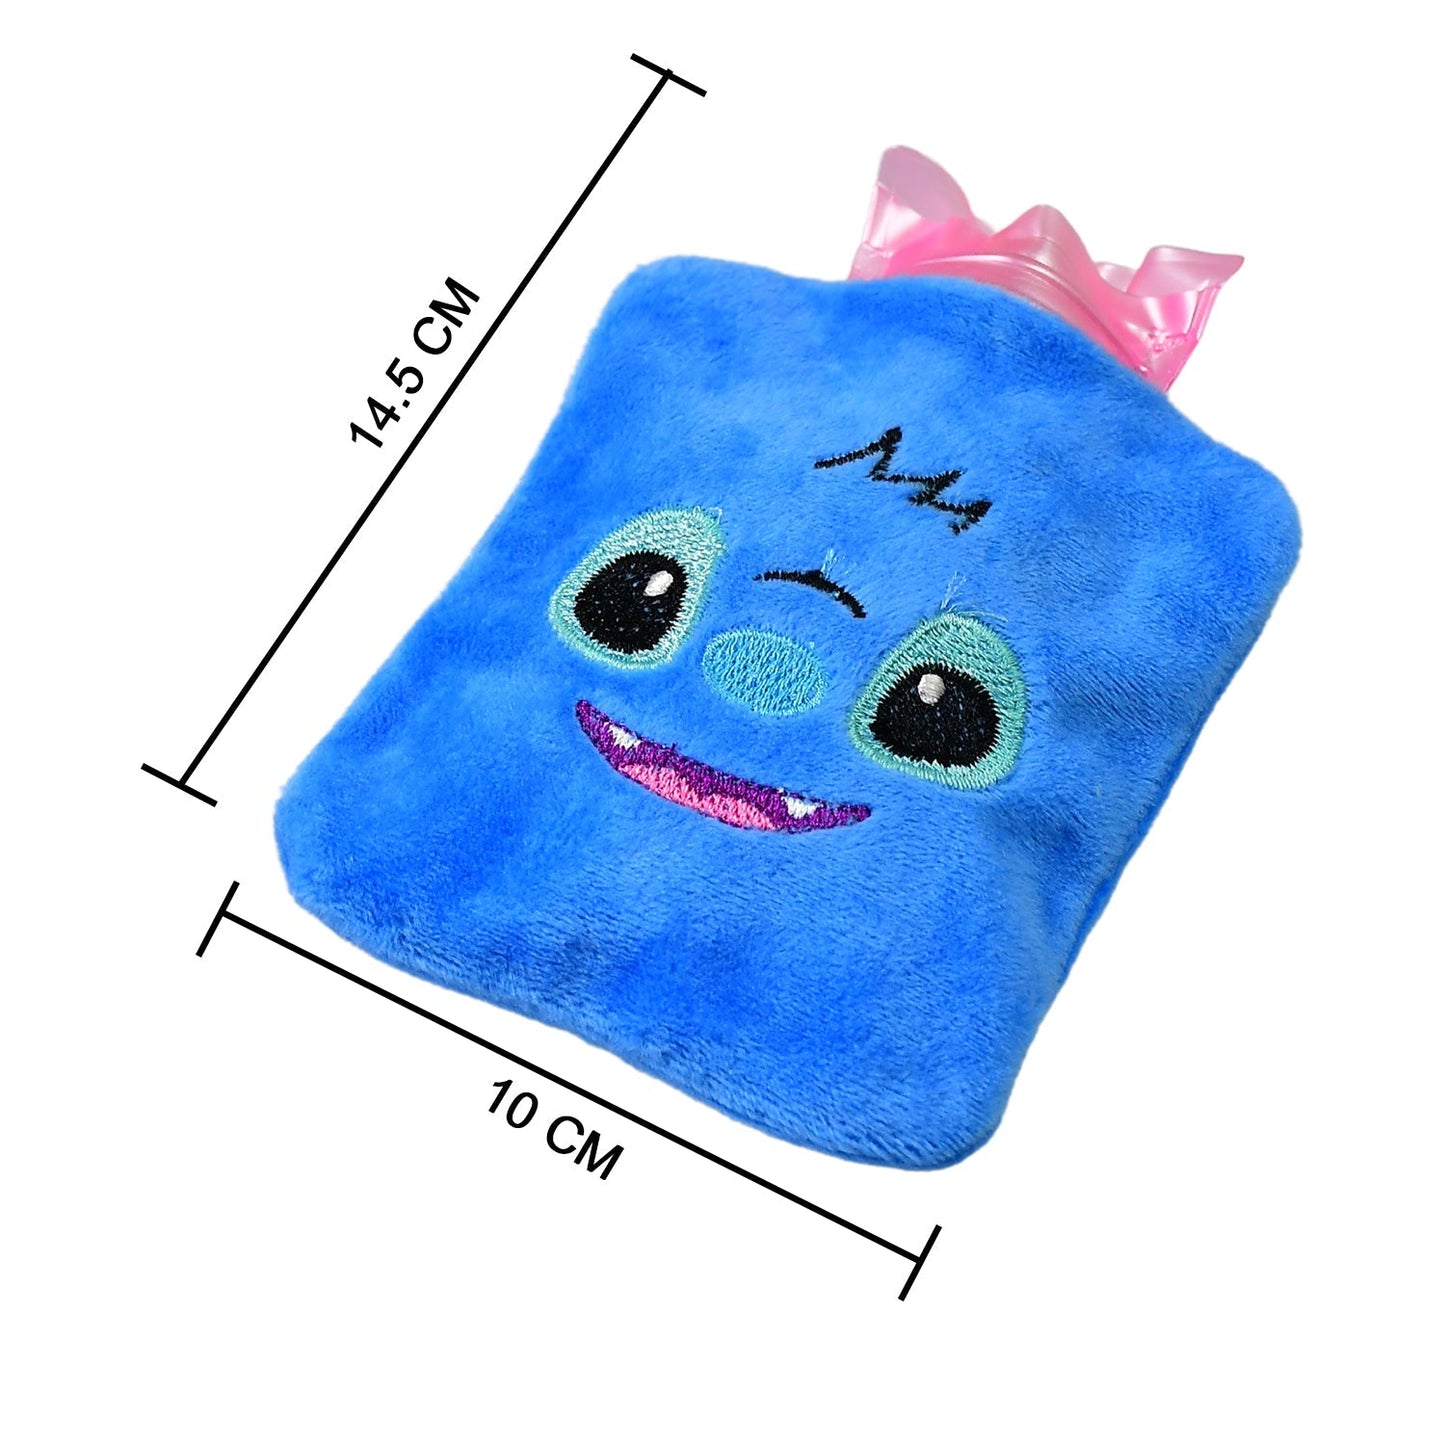 6512 Blue Stitch small Hot Water Bag with Cover for Pain Relief, Neck, Shoulder Pain and Hand, Feet Warmer, Menstrual Cramps. DeoDap